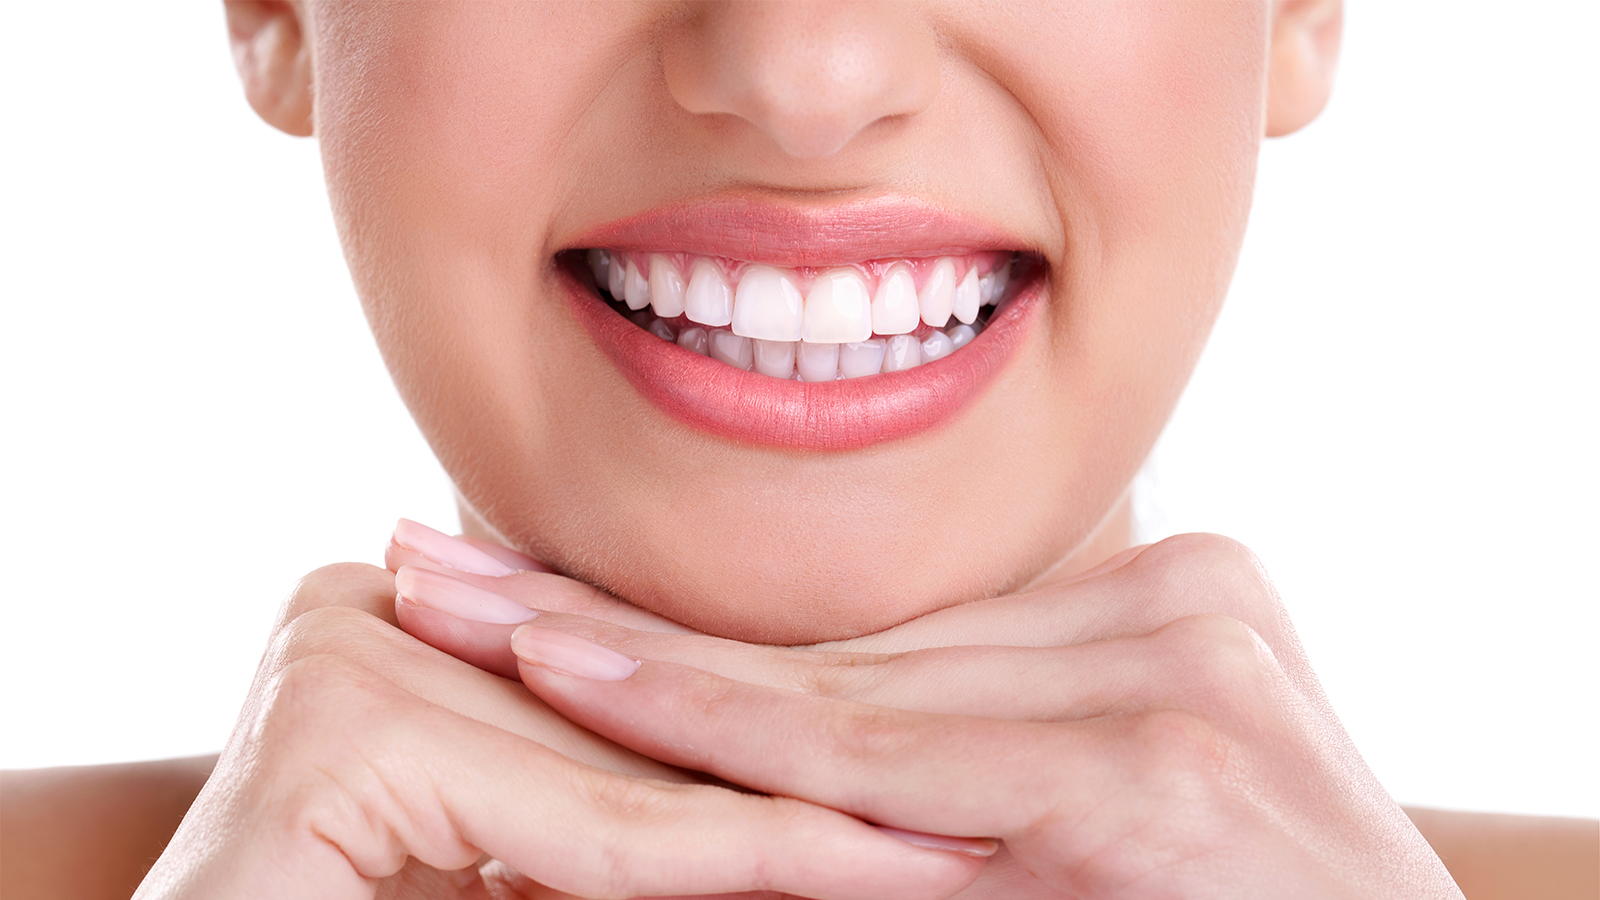 The Complete Guide to Teeth Whitening: What You Need to Know Before Getting Started